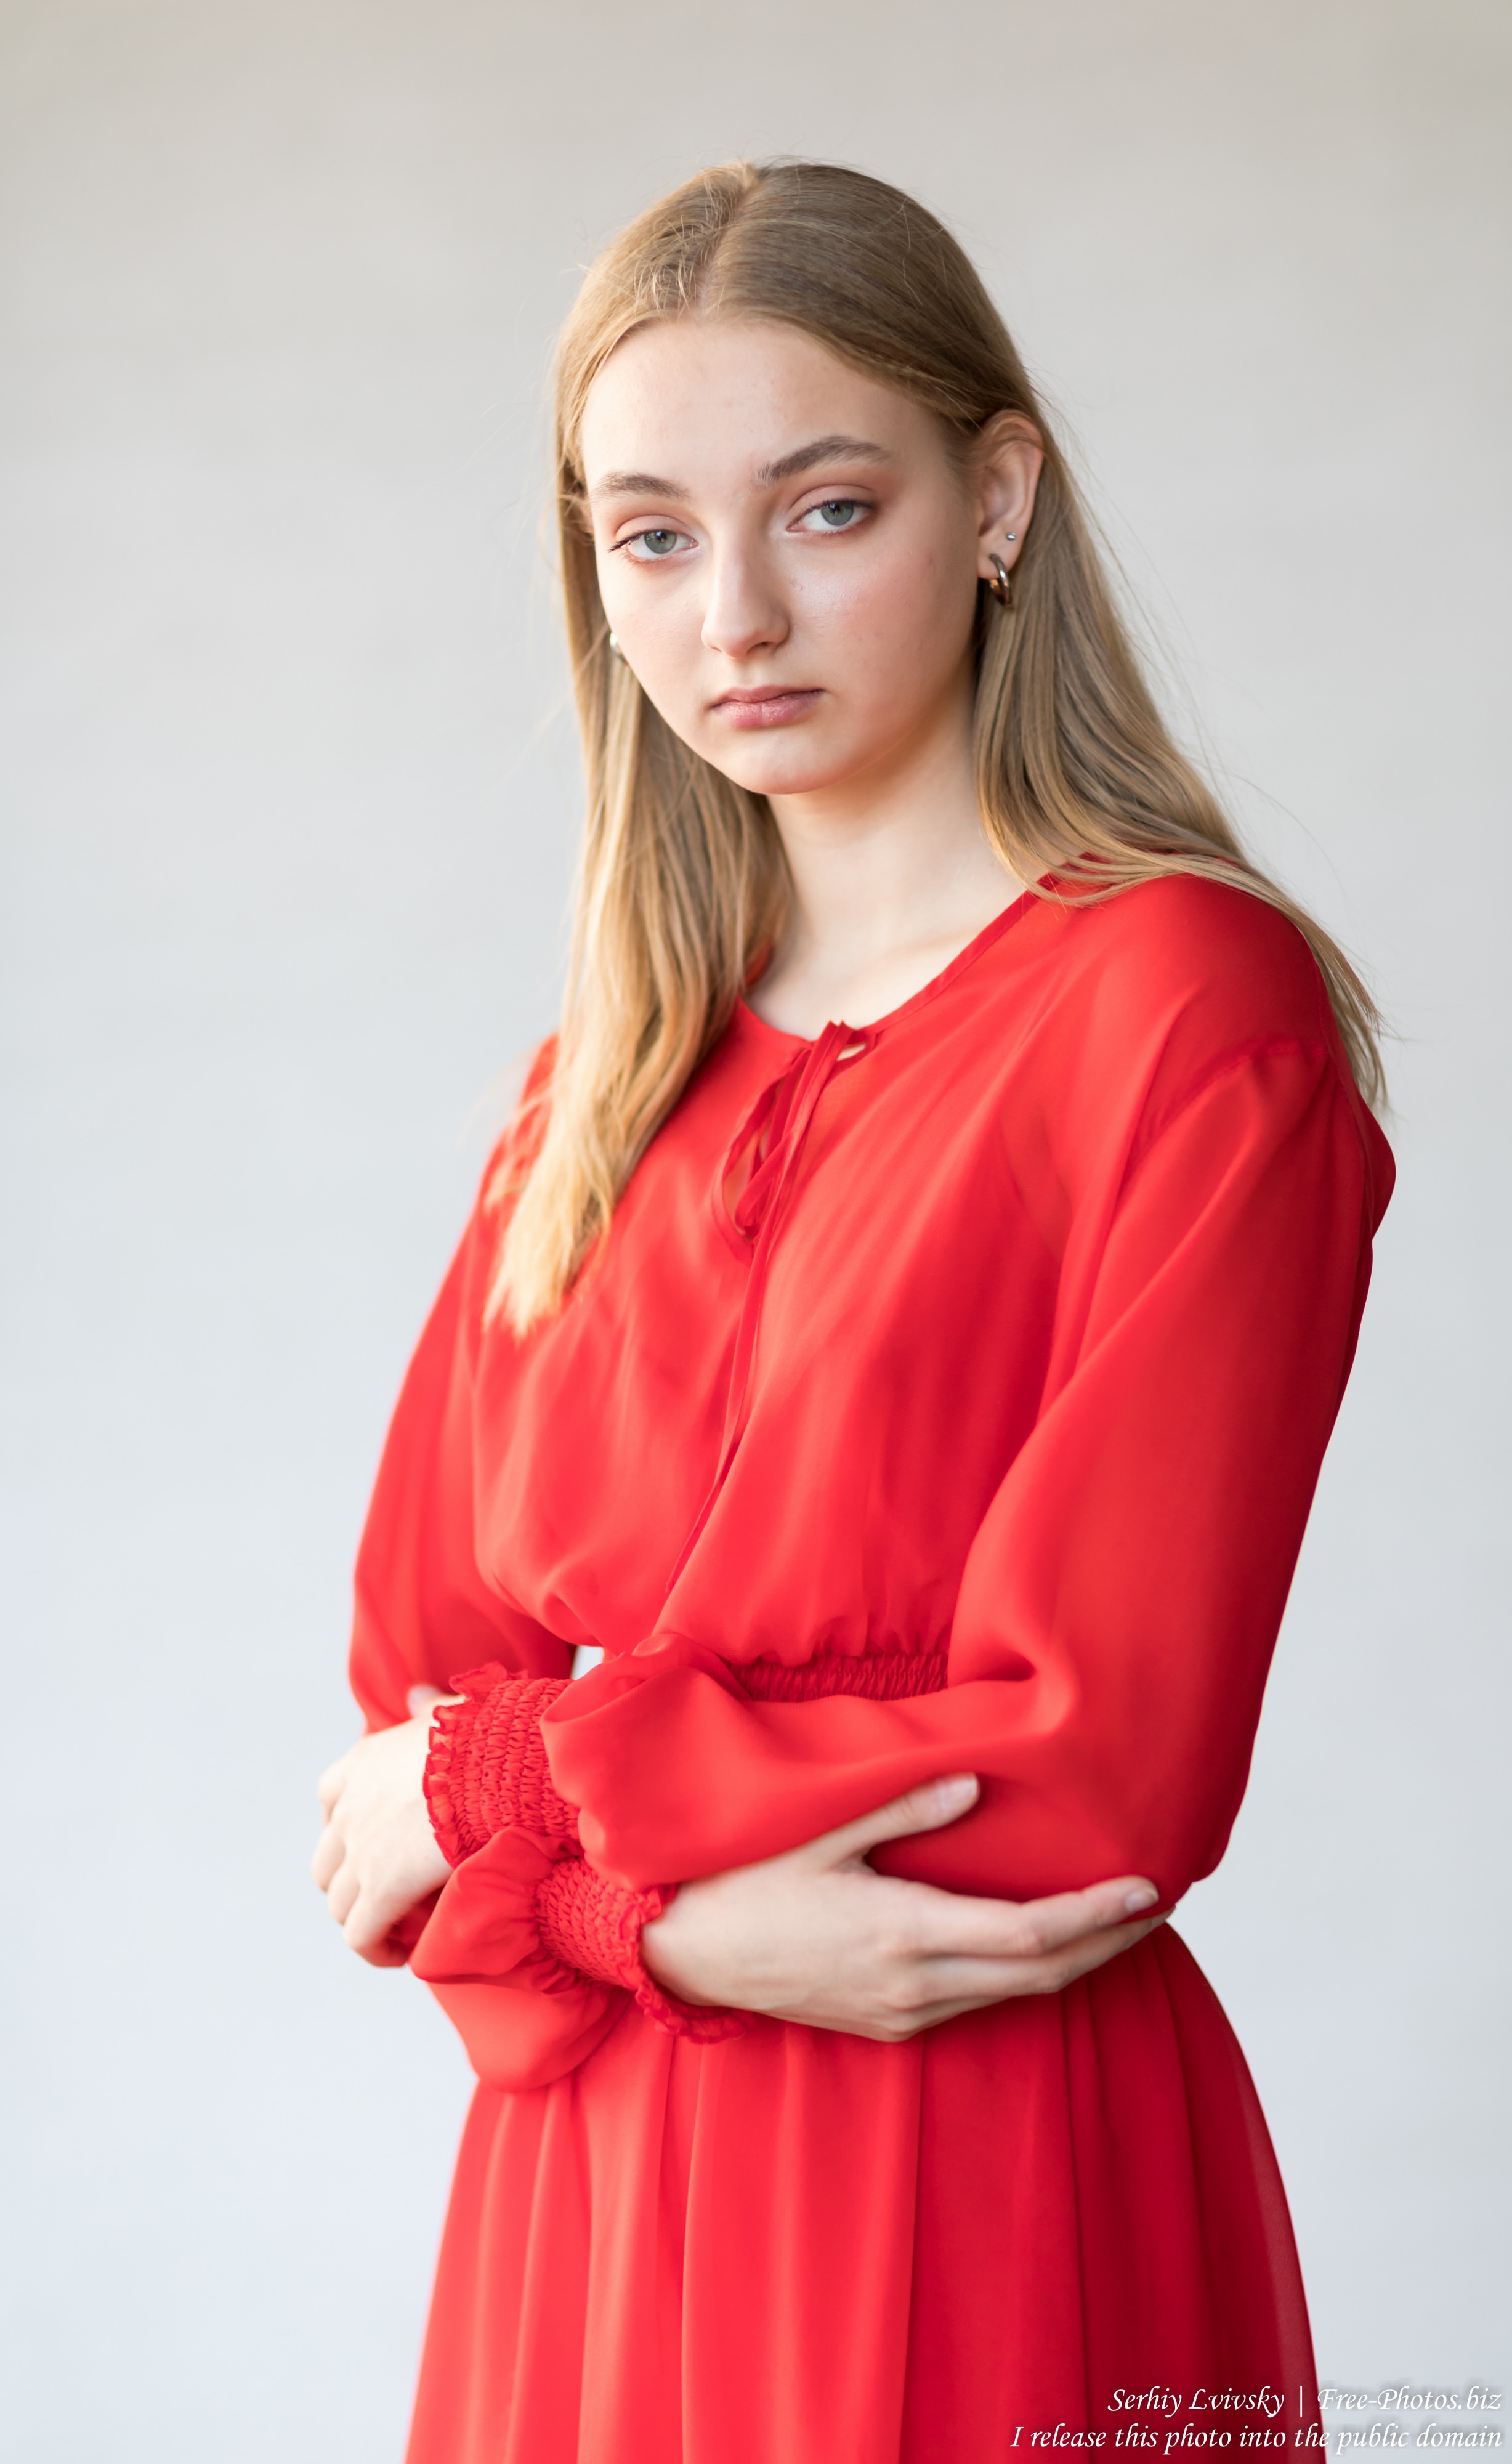 Nastia - a 16-year-old natural blonde girl photographed in September 2019 by Serhiy Lvivsky, picture 12